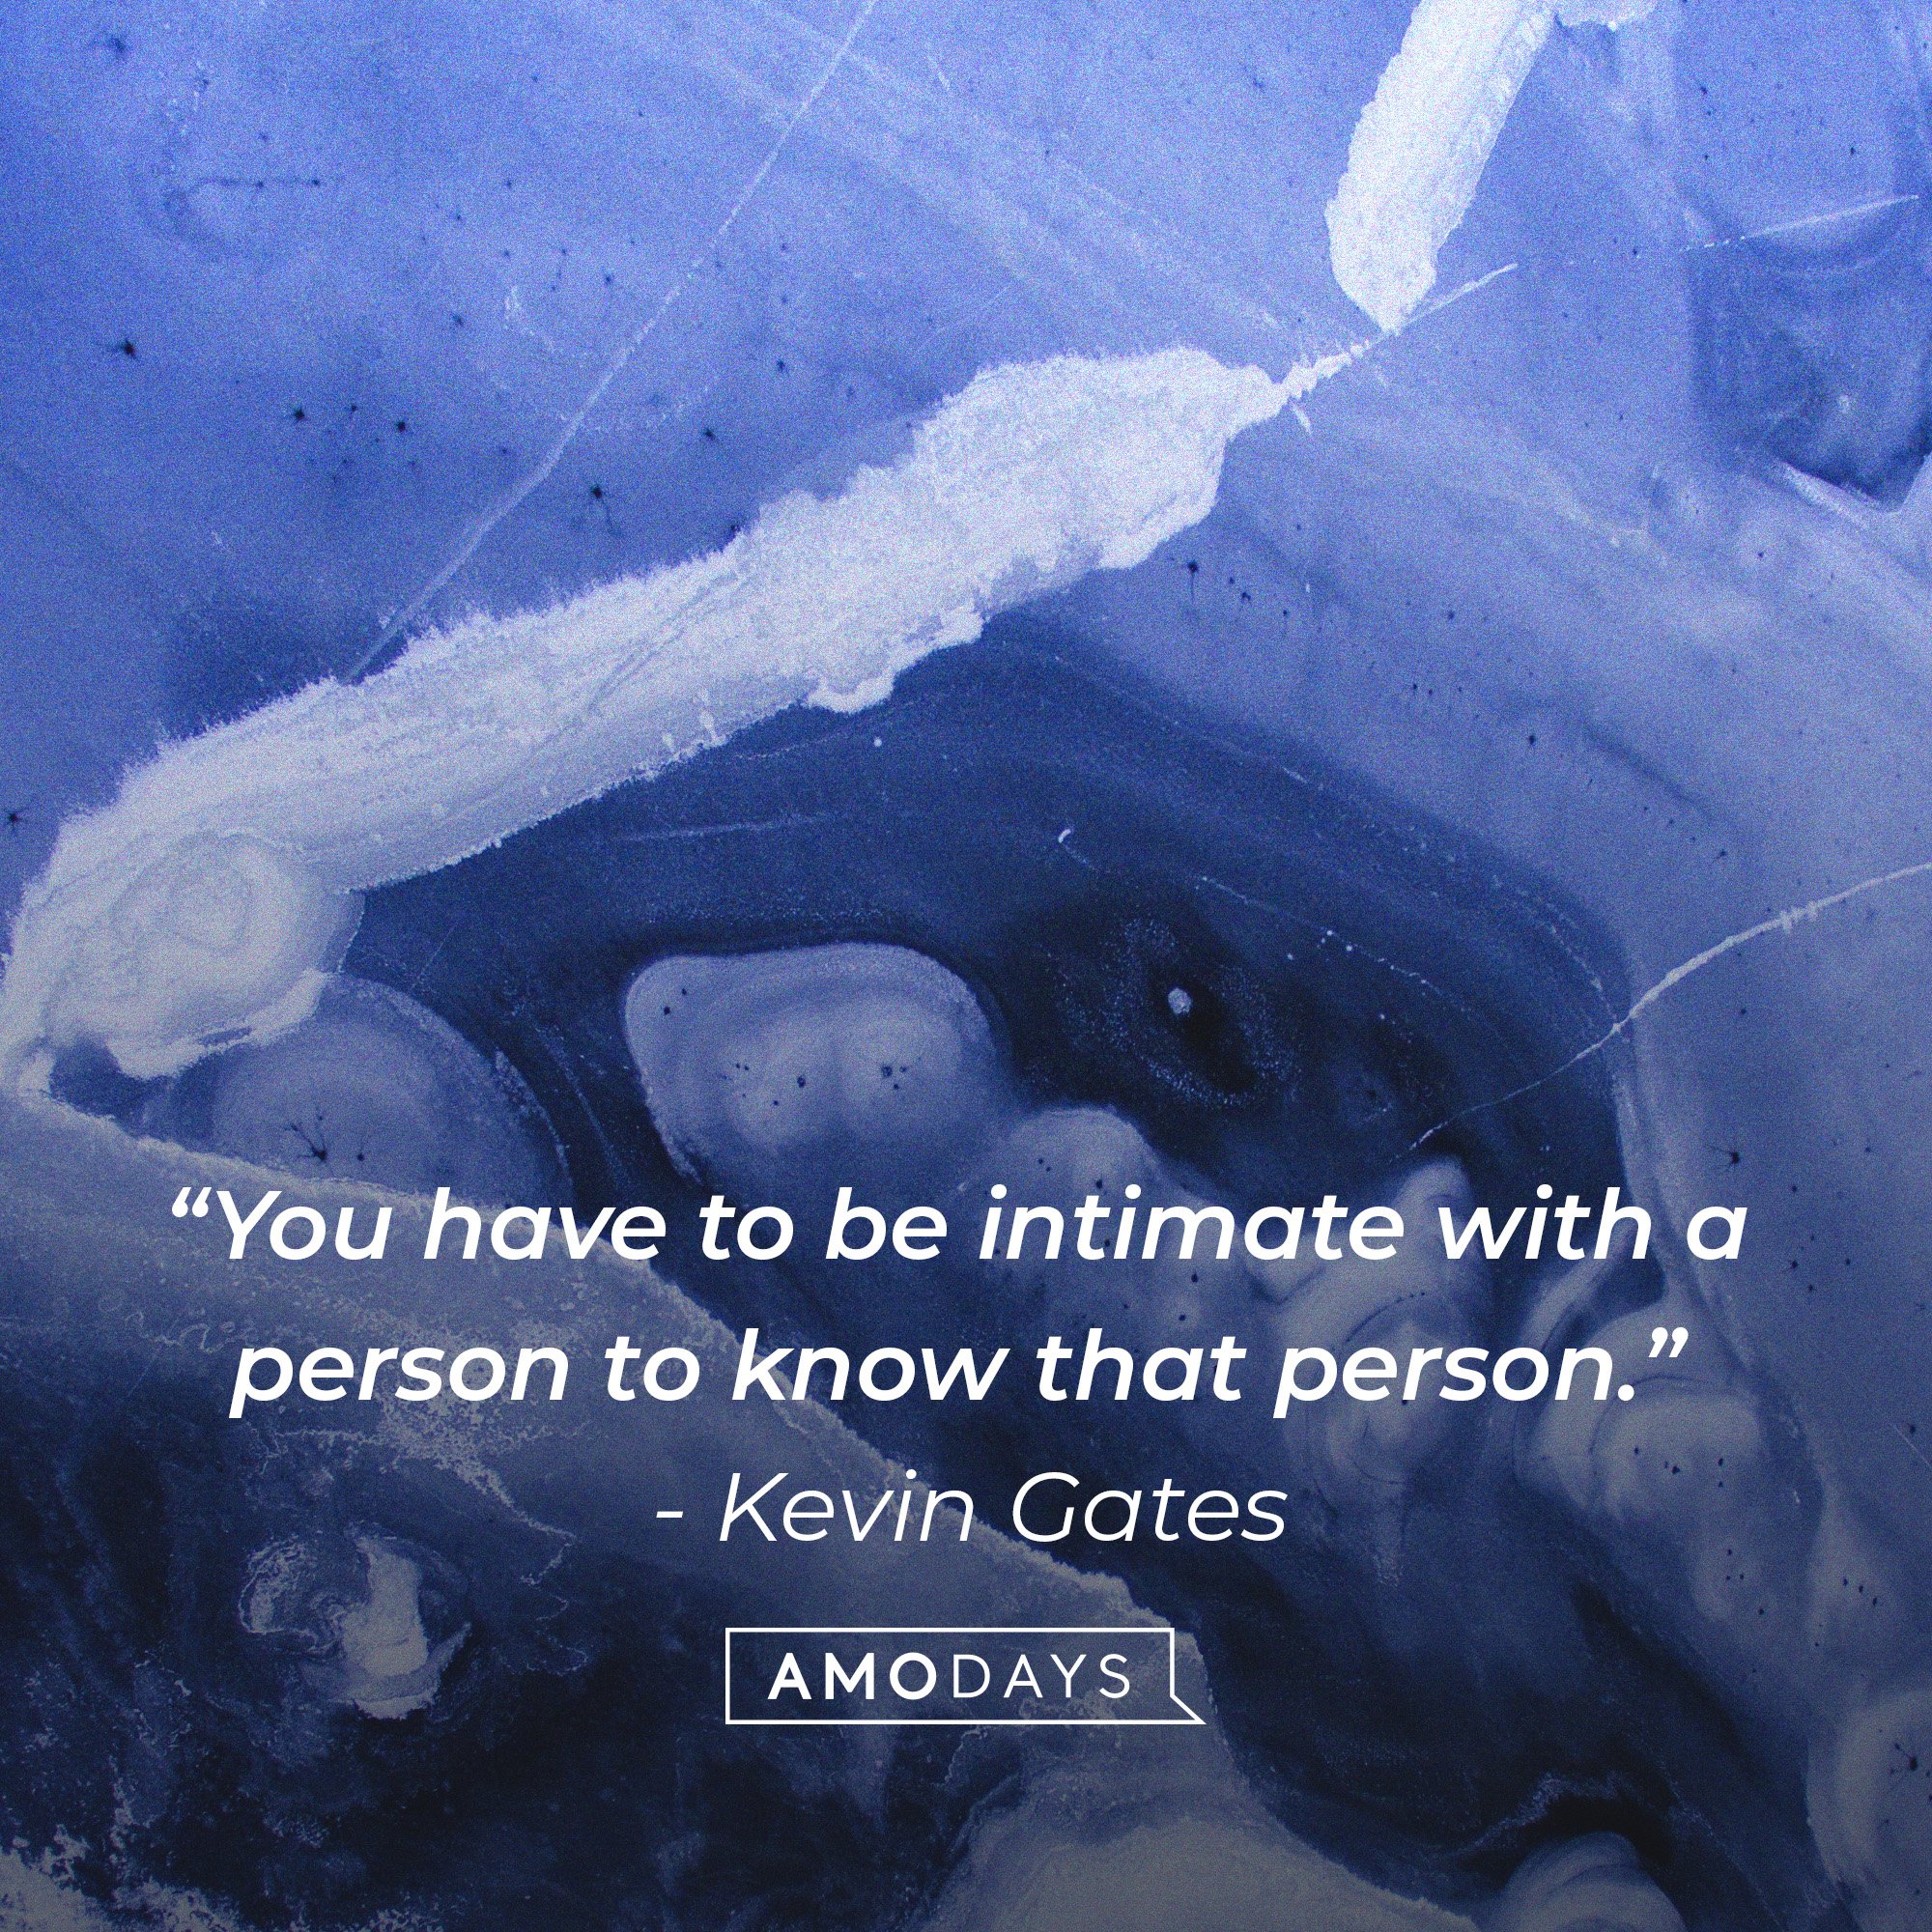 Kevin Gates’ quote: “You have to be intimate with a person to know that person.” | Image: AmoDays